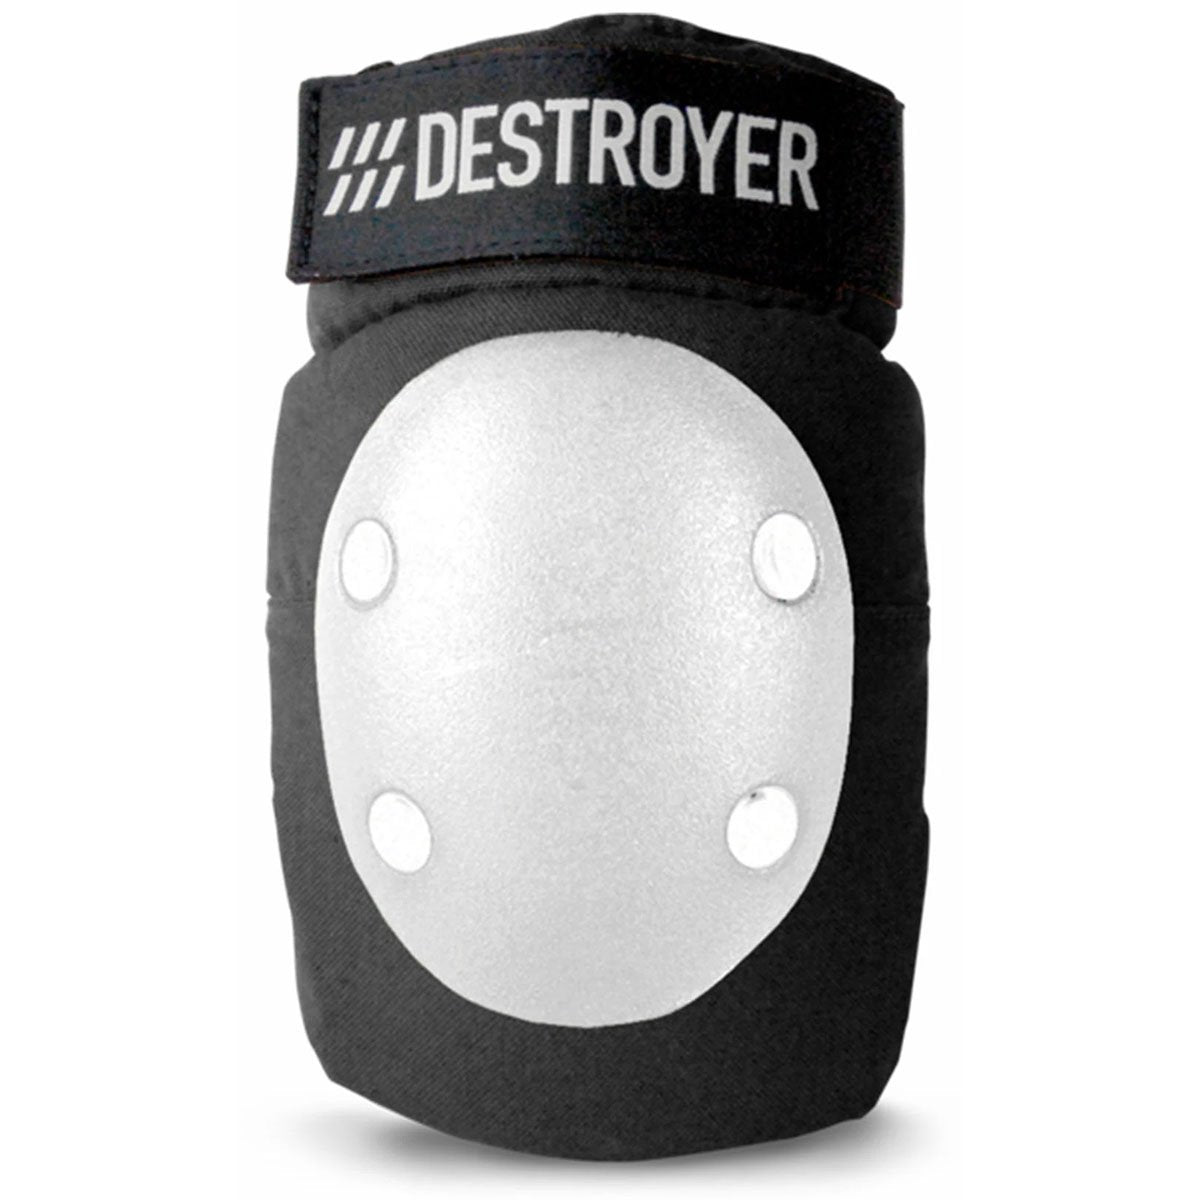 Destroyer The Elbow Pads - Black/White image 1